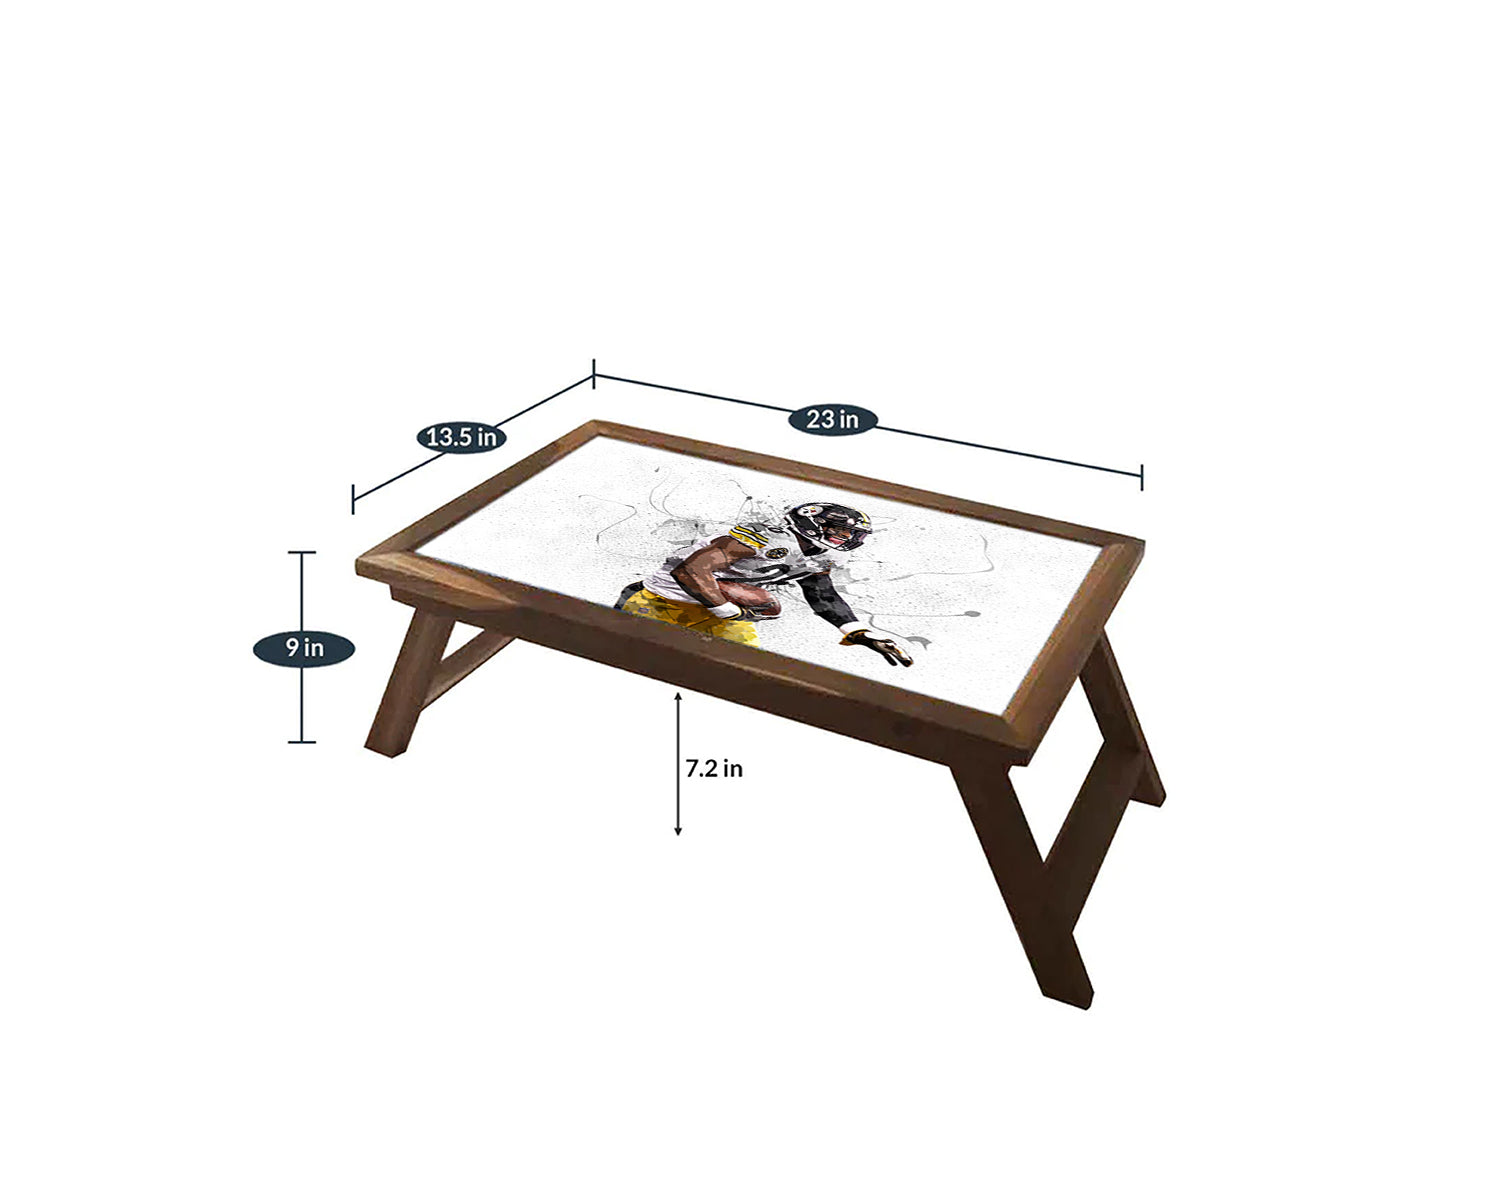 Le'Veon Bell Splash Effect Coffee and Laptop Table 